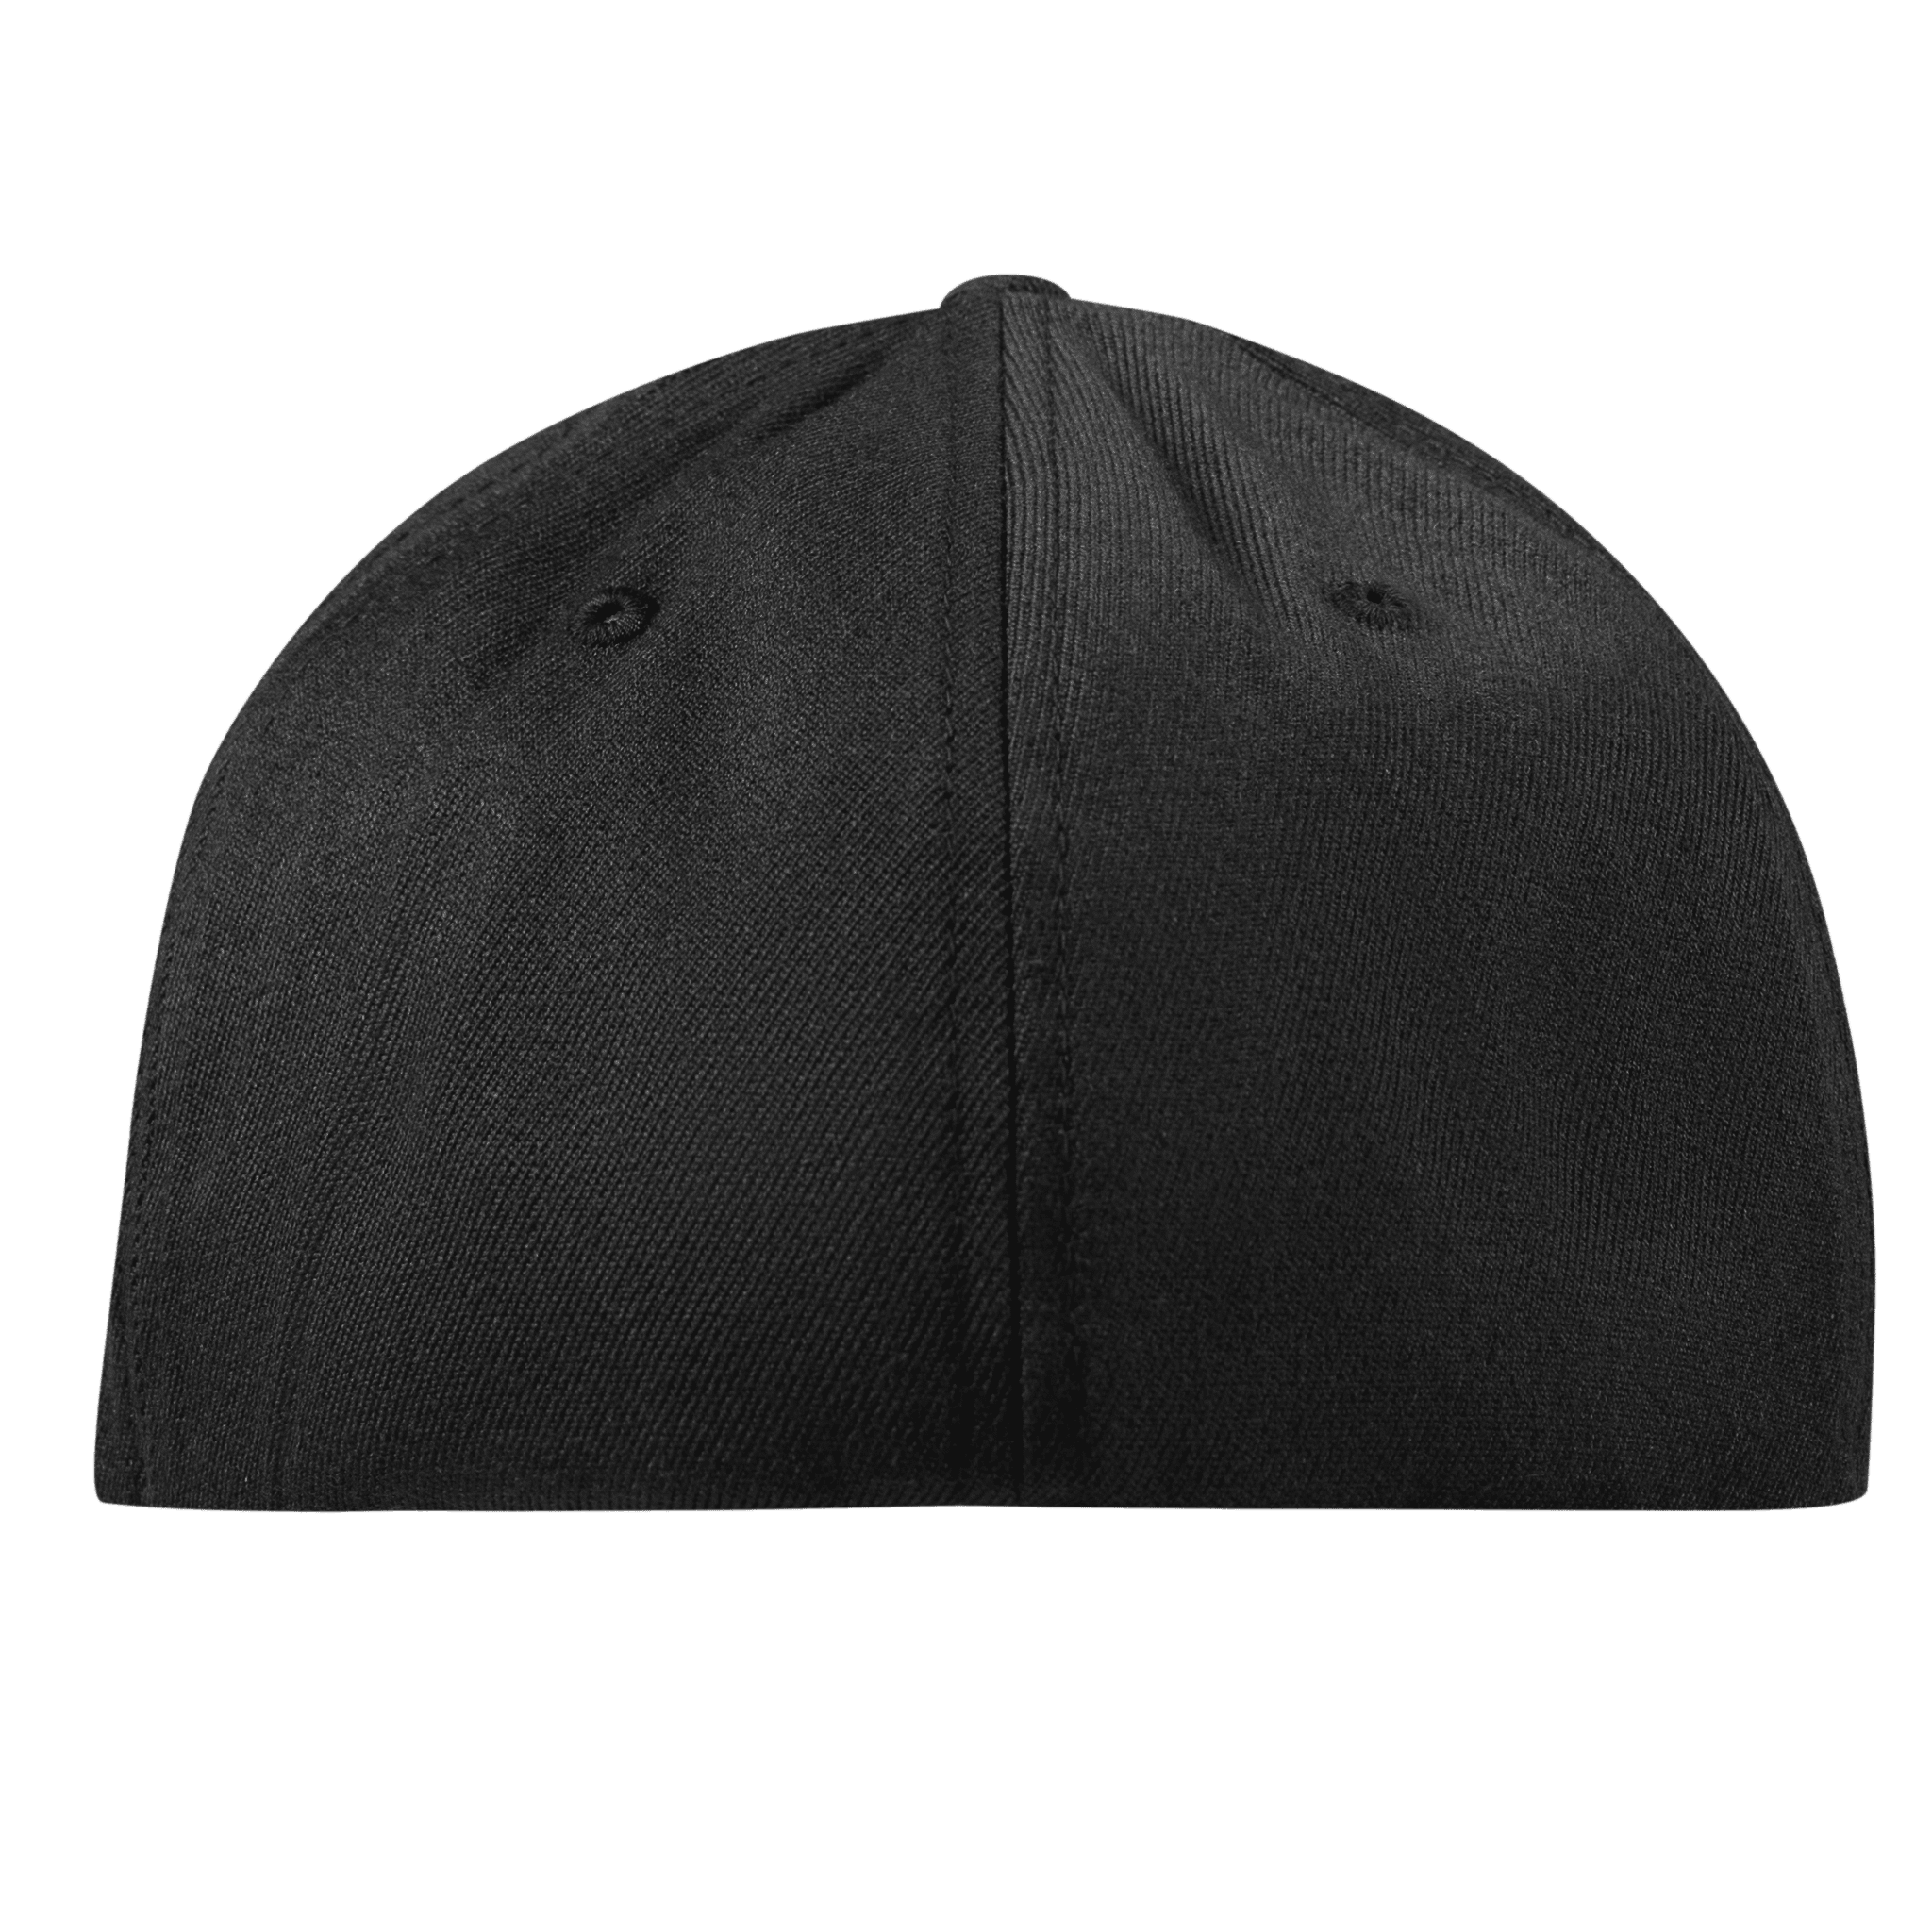 Colorado Compass Flexfit Fitted Back Black